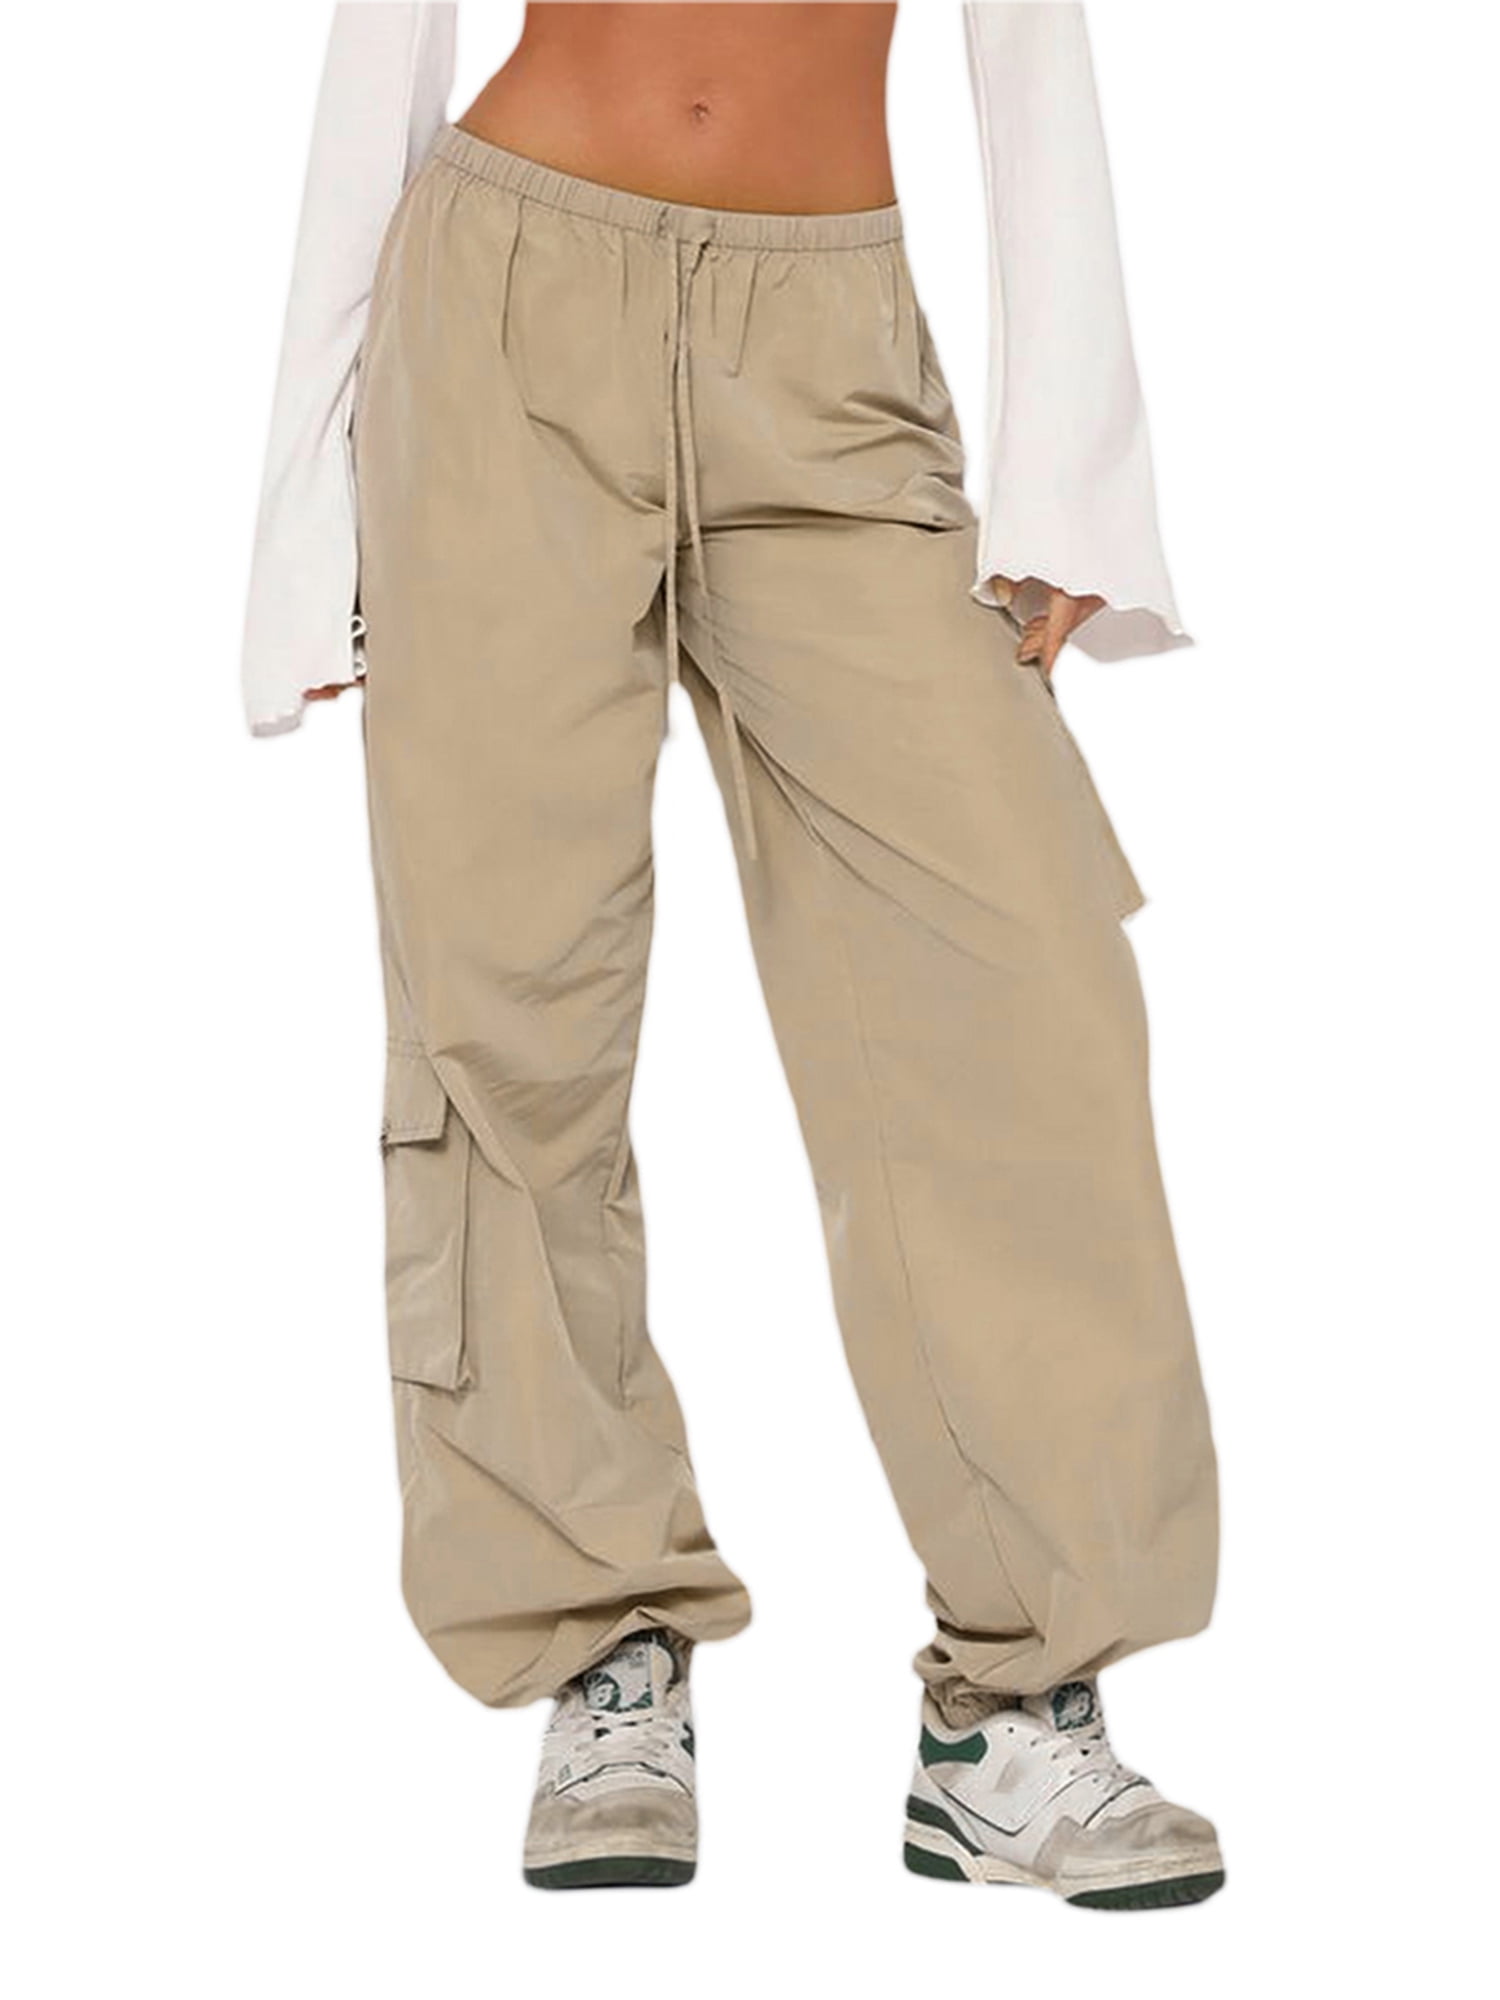 Women Low Waist Adjustable Drawstring Cargo Jeans Straight Baggy Pants  Sweatpants with Multi-Pockets 